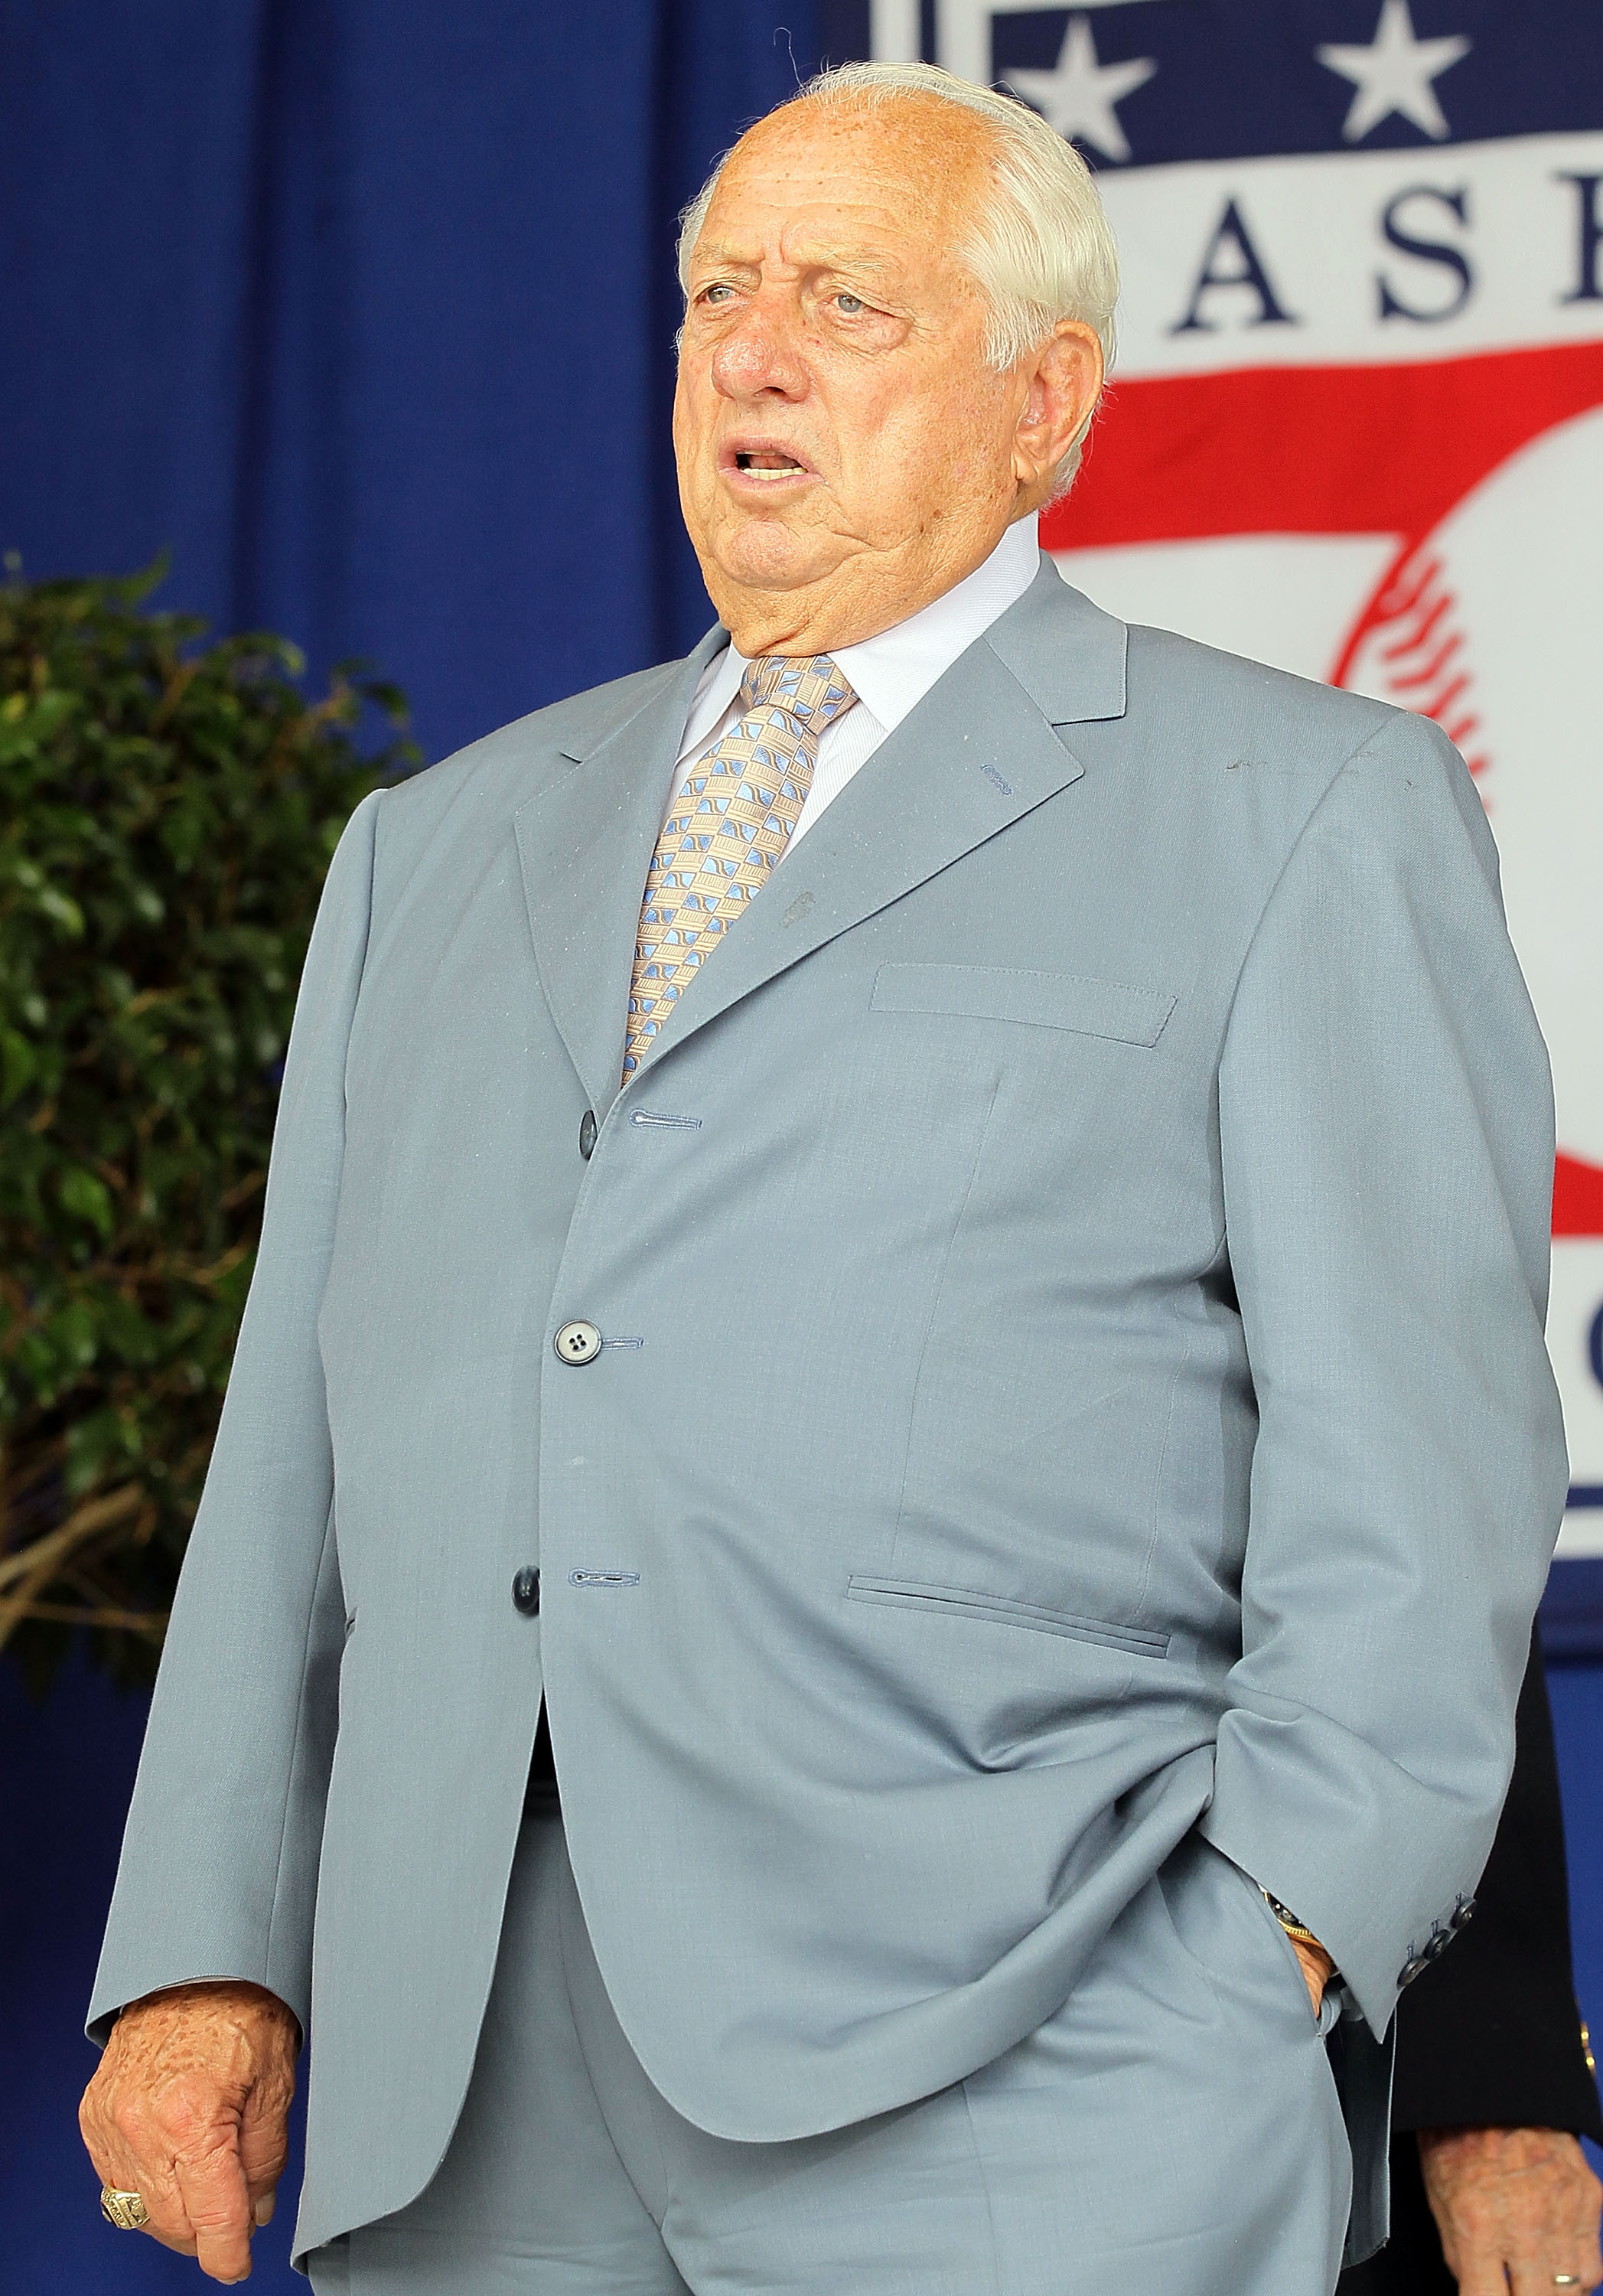 COOPERSTOWN, NY - JULY 25:  Hall of Famer Tommy Lasorda attends the Baseball Hall of Fame induction ceremony at Clark Sports Center on July 25, 20010 in Cooperstown, New York.  (Photo by Jim McIsaac/Getty Images)